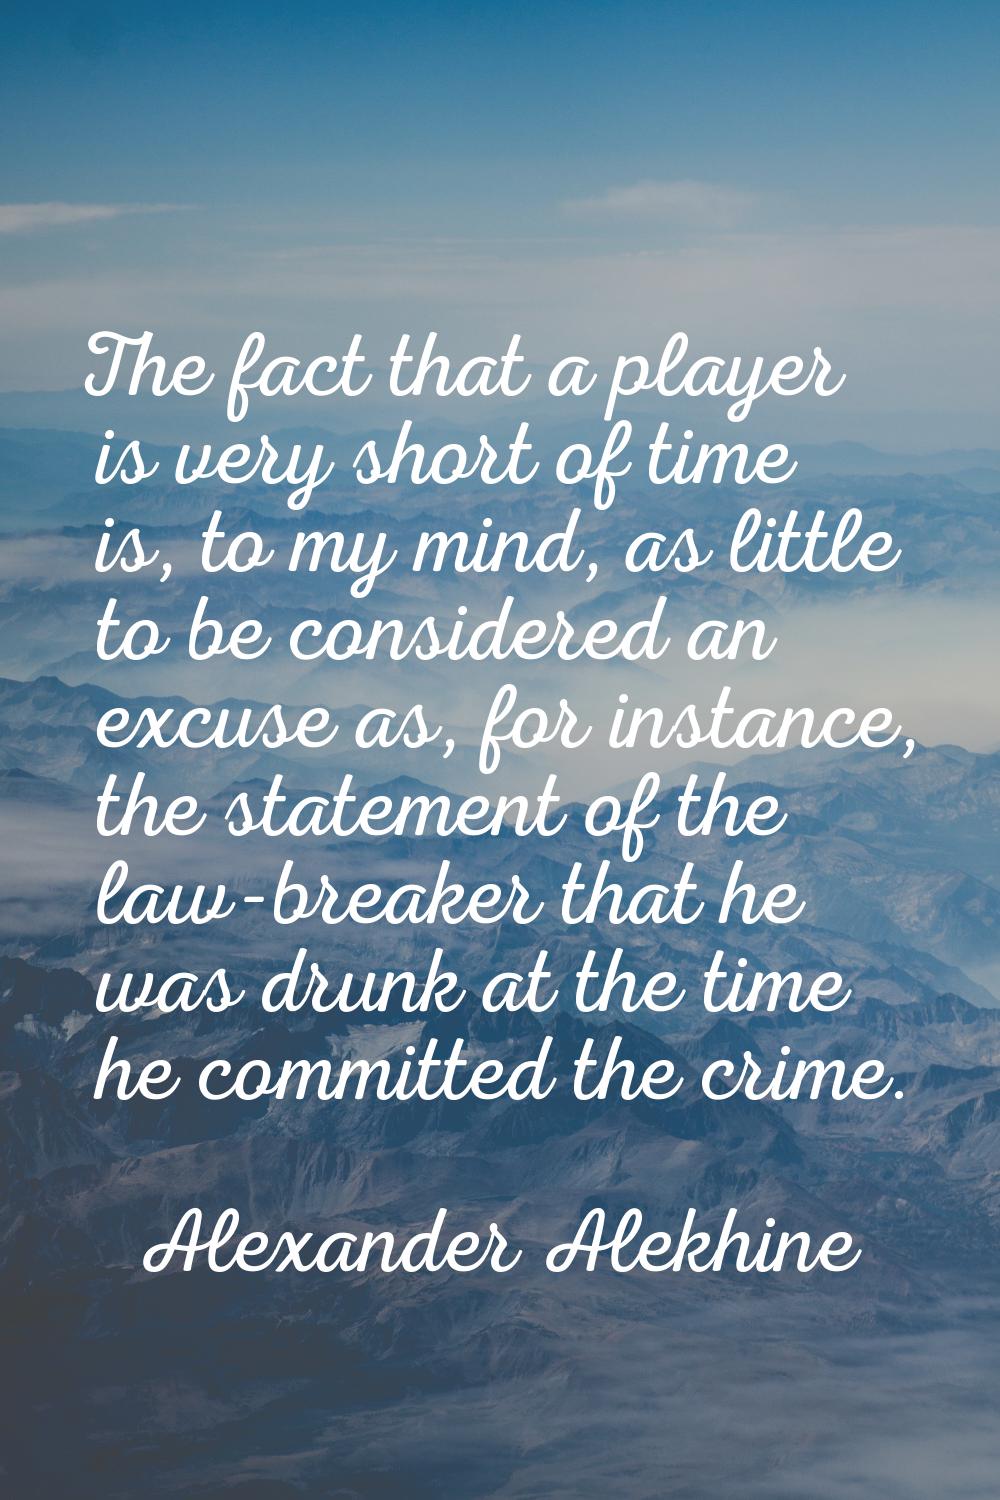 The fact that a player is very short of time is, to my mind, as little to be considered an excuse a